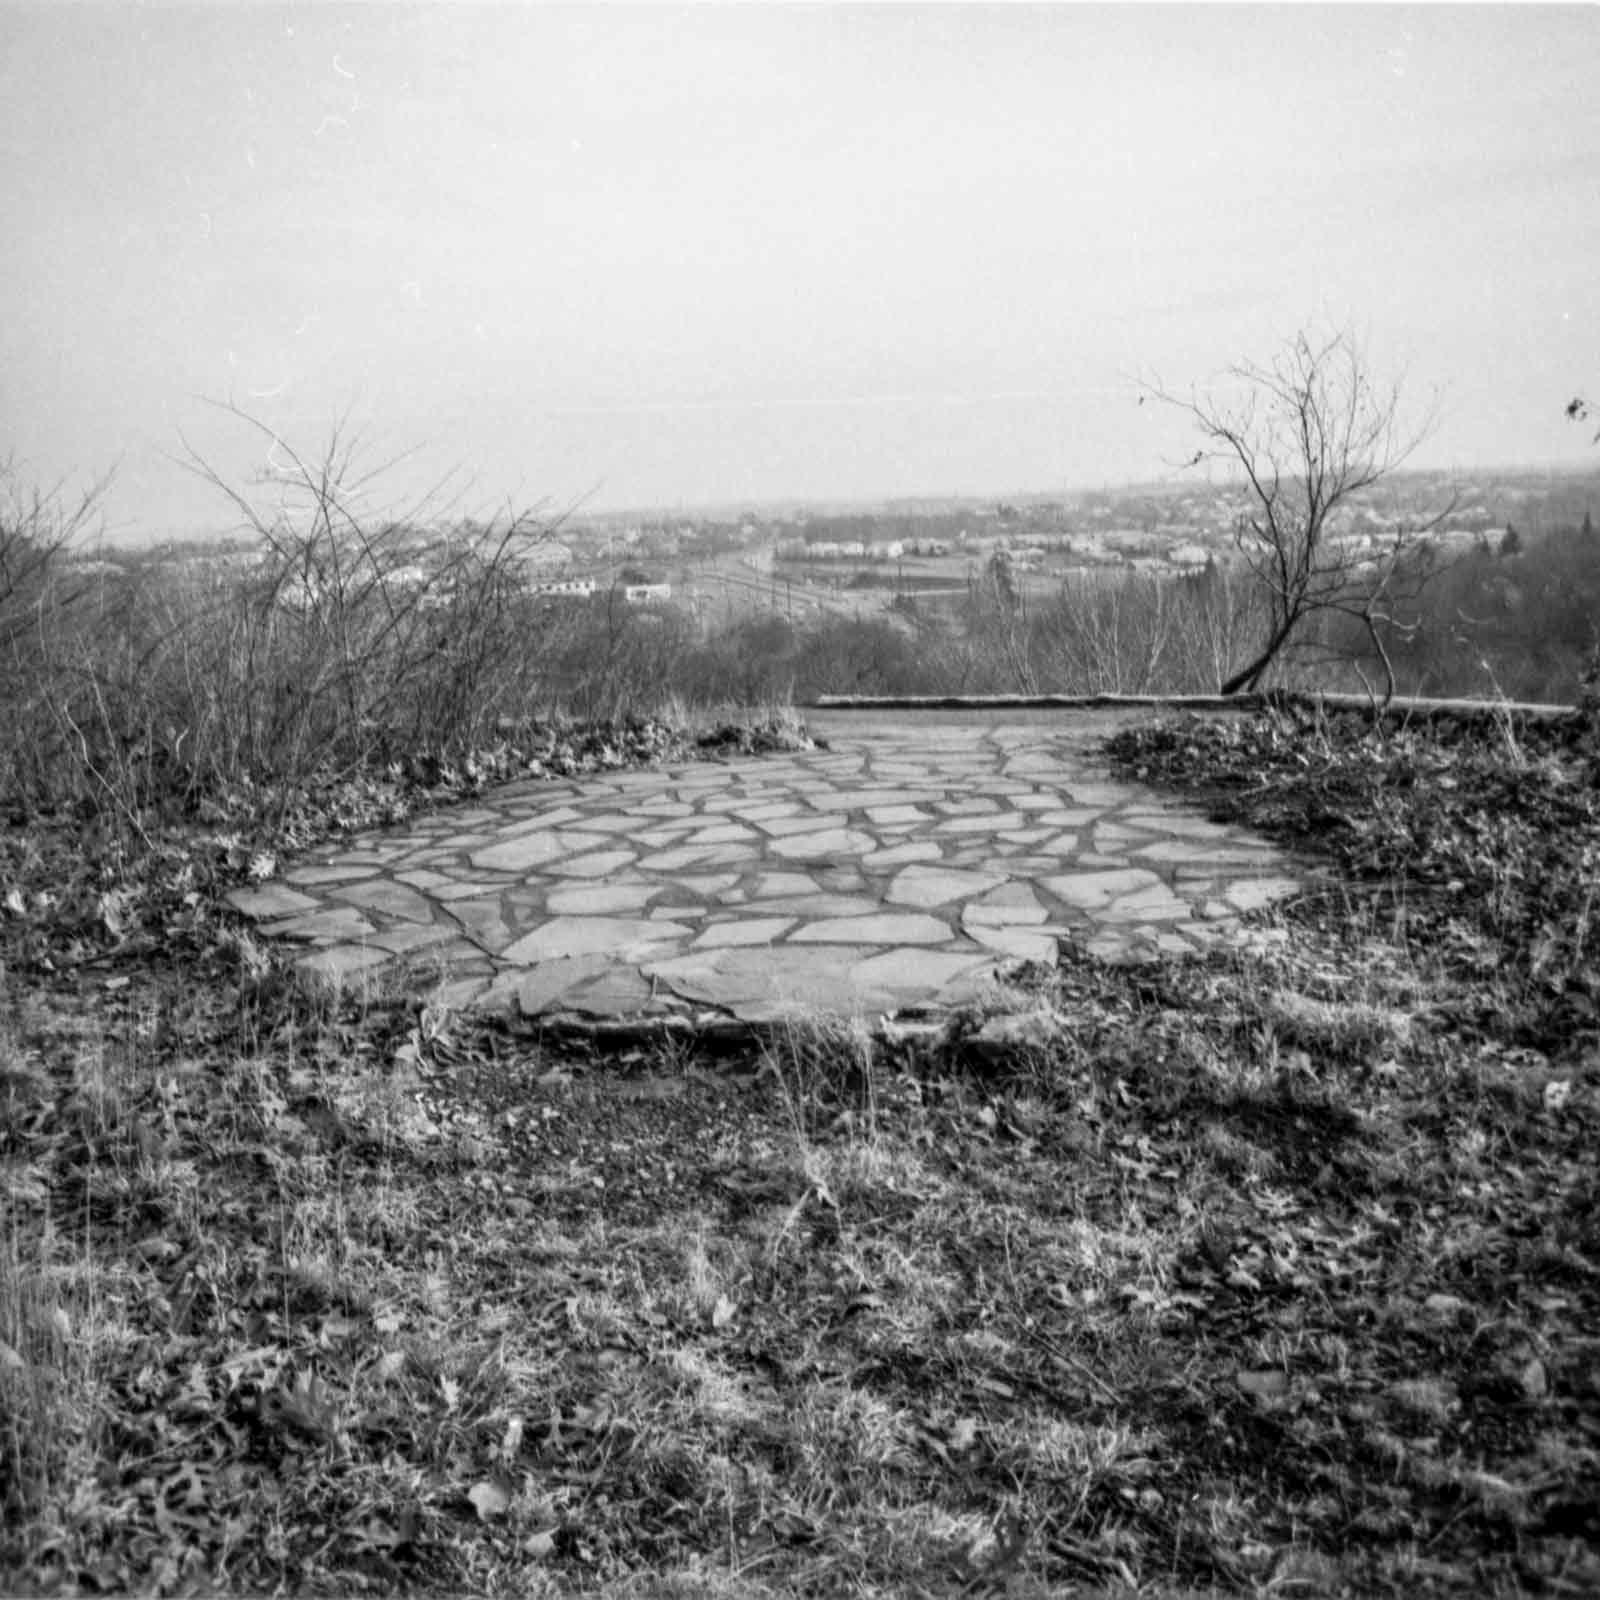 Black and white photograph of building ruins in a forest in Cedar Grove, New Jersey